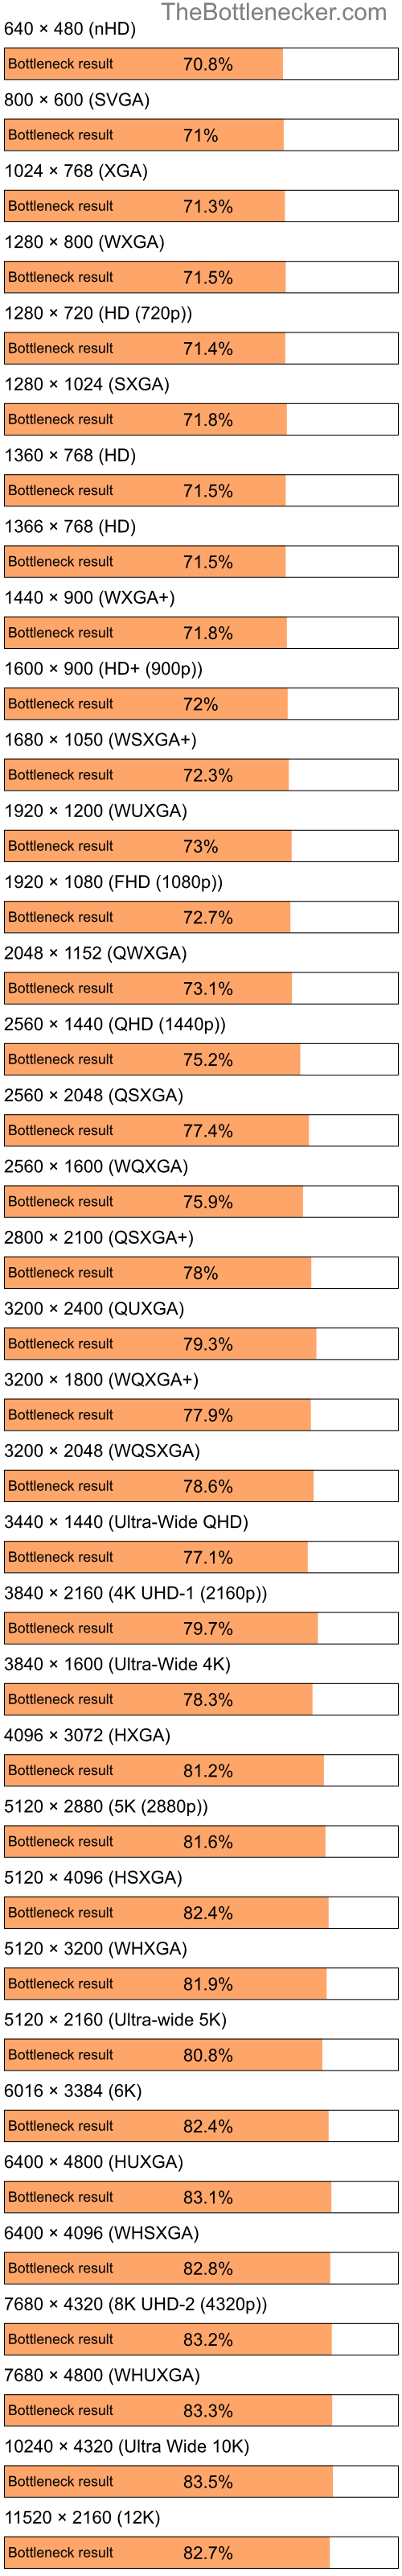 Bottleneck results by resolution for Intel Celeron M 410 and AMD Mobility Radeon HD 4200 in Graphic Card Intense Tasks